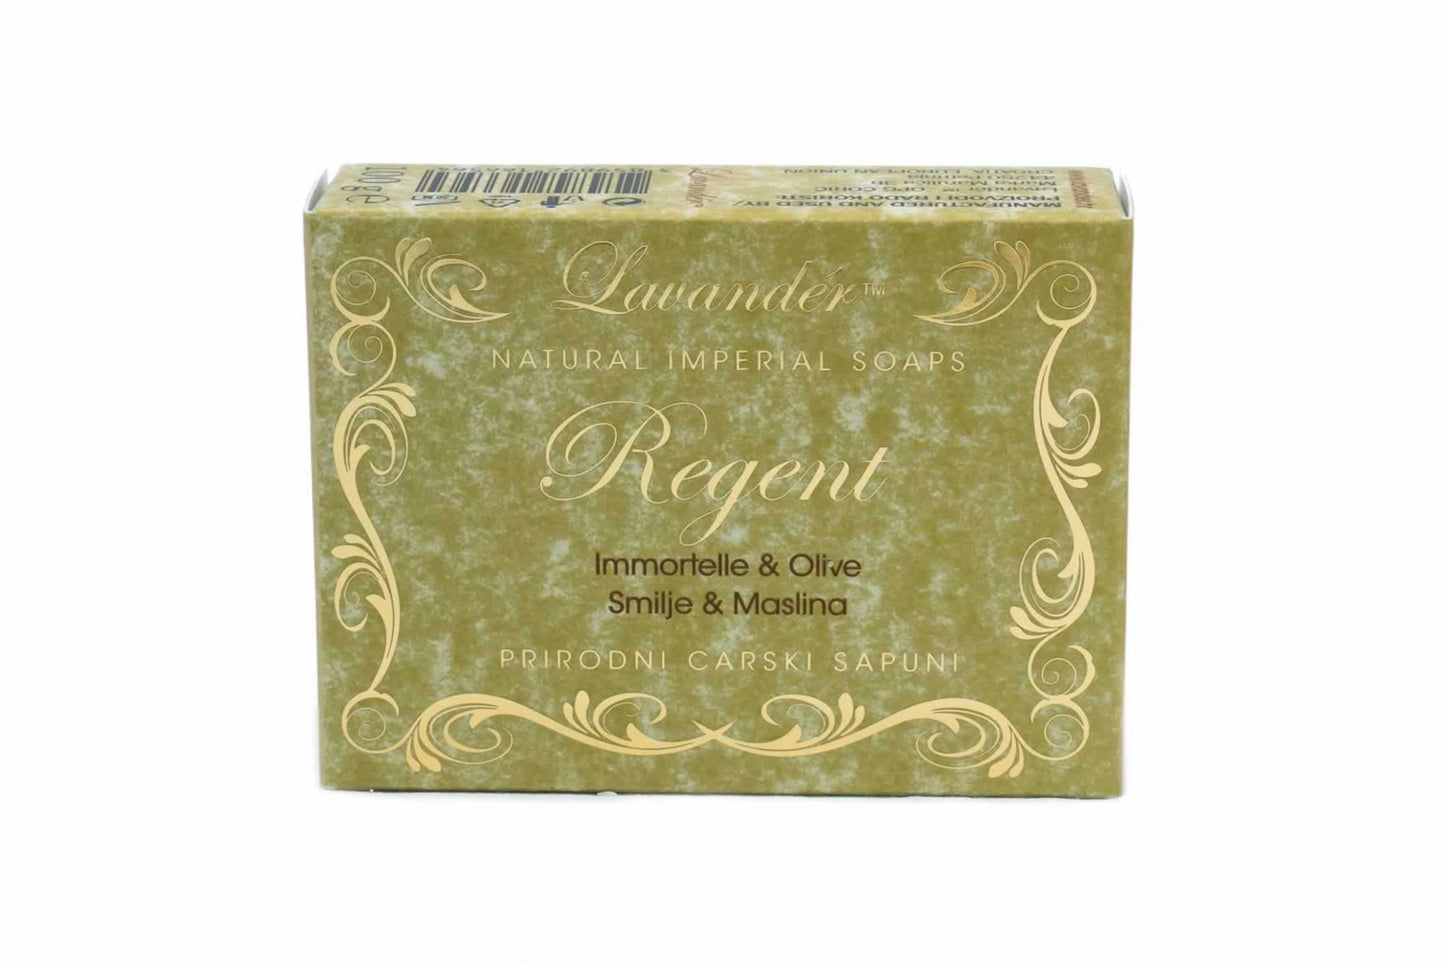 Regént immortelle soap - with immortelle macerate for skin renewal